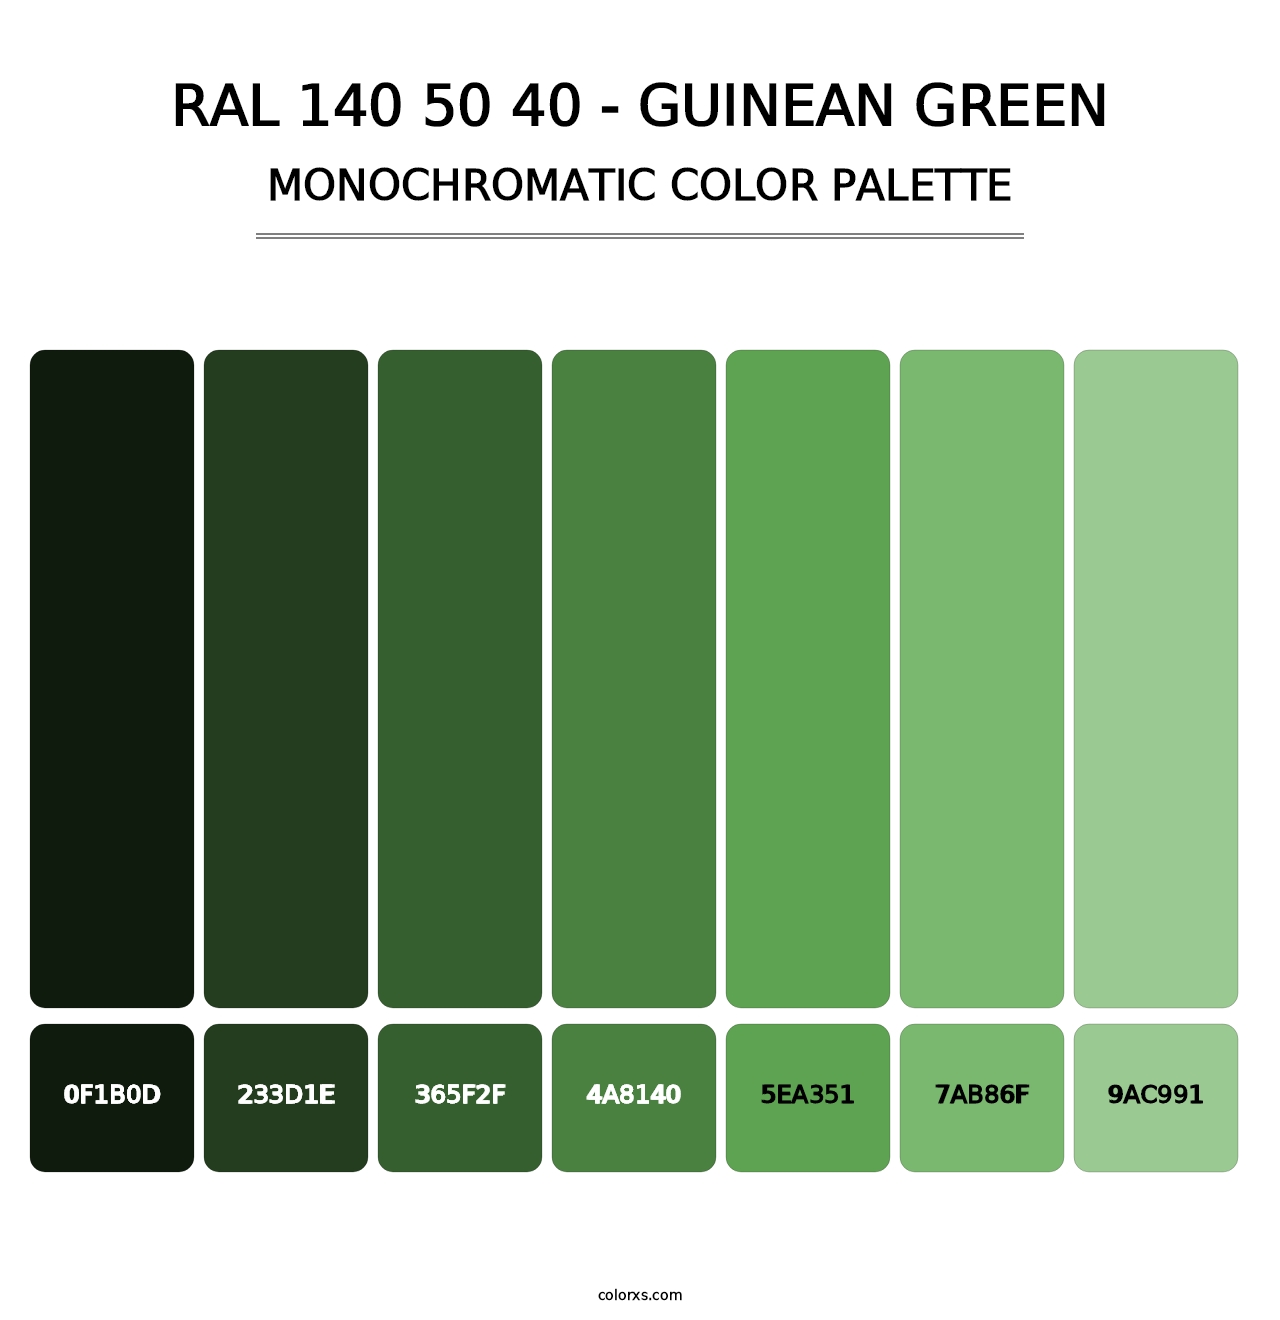 RAL 140 50 40 - Guinean Green - Monochromatic Color Palette